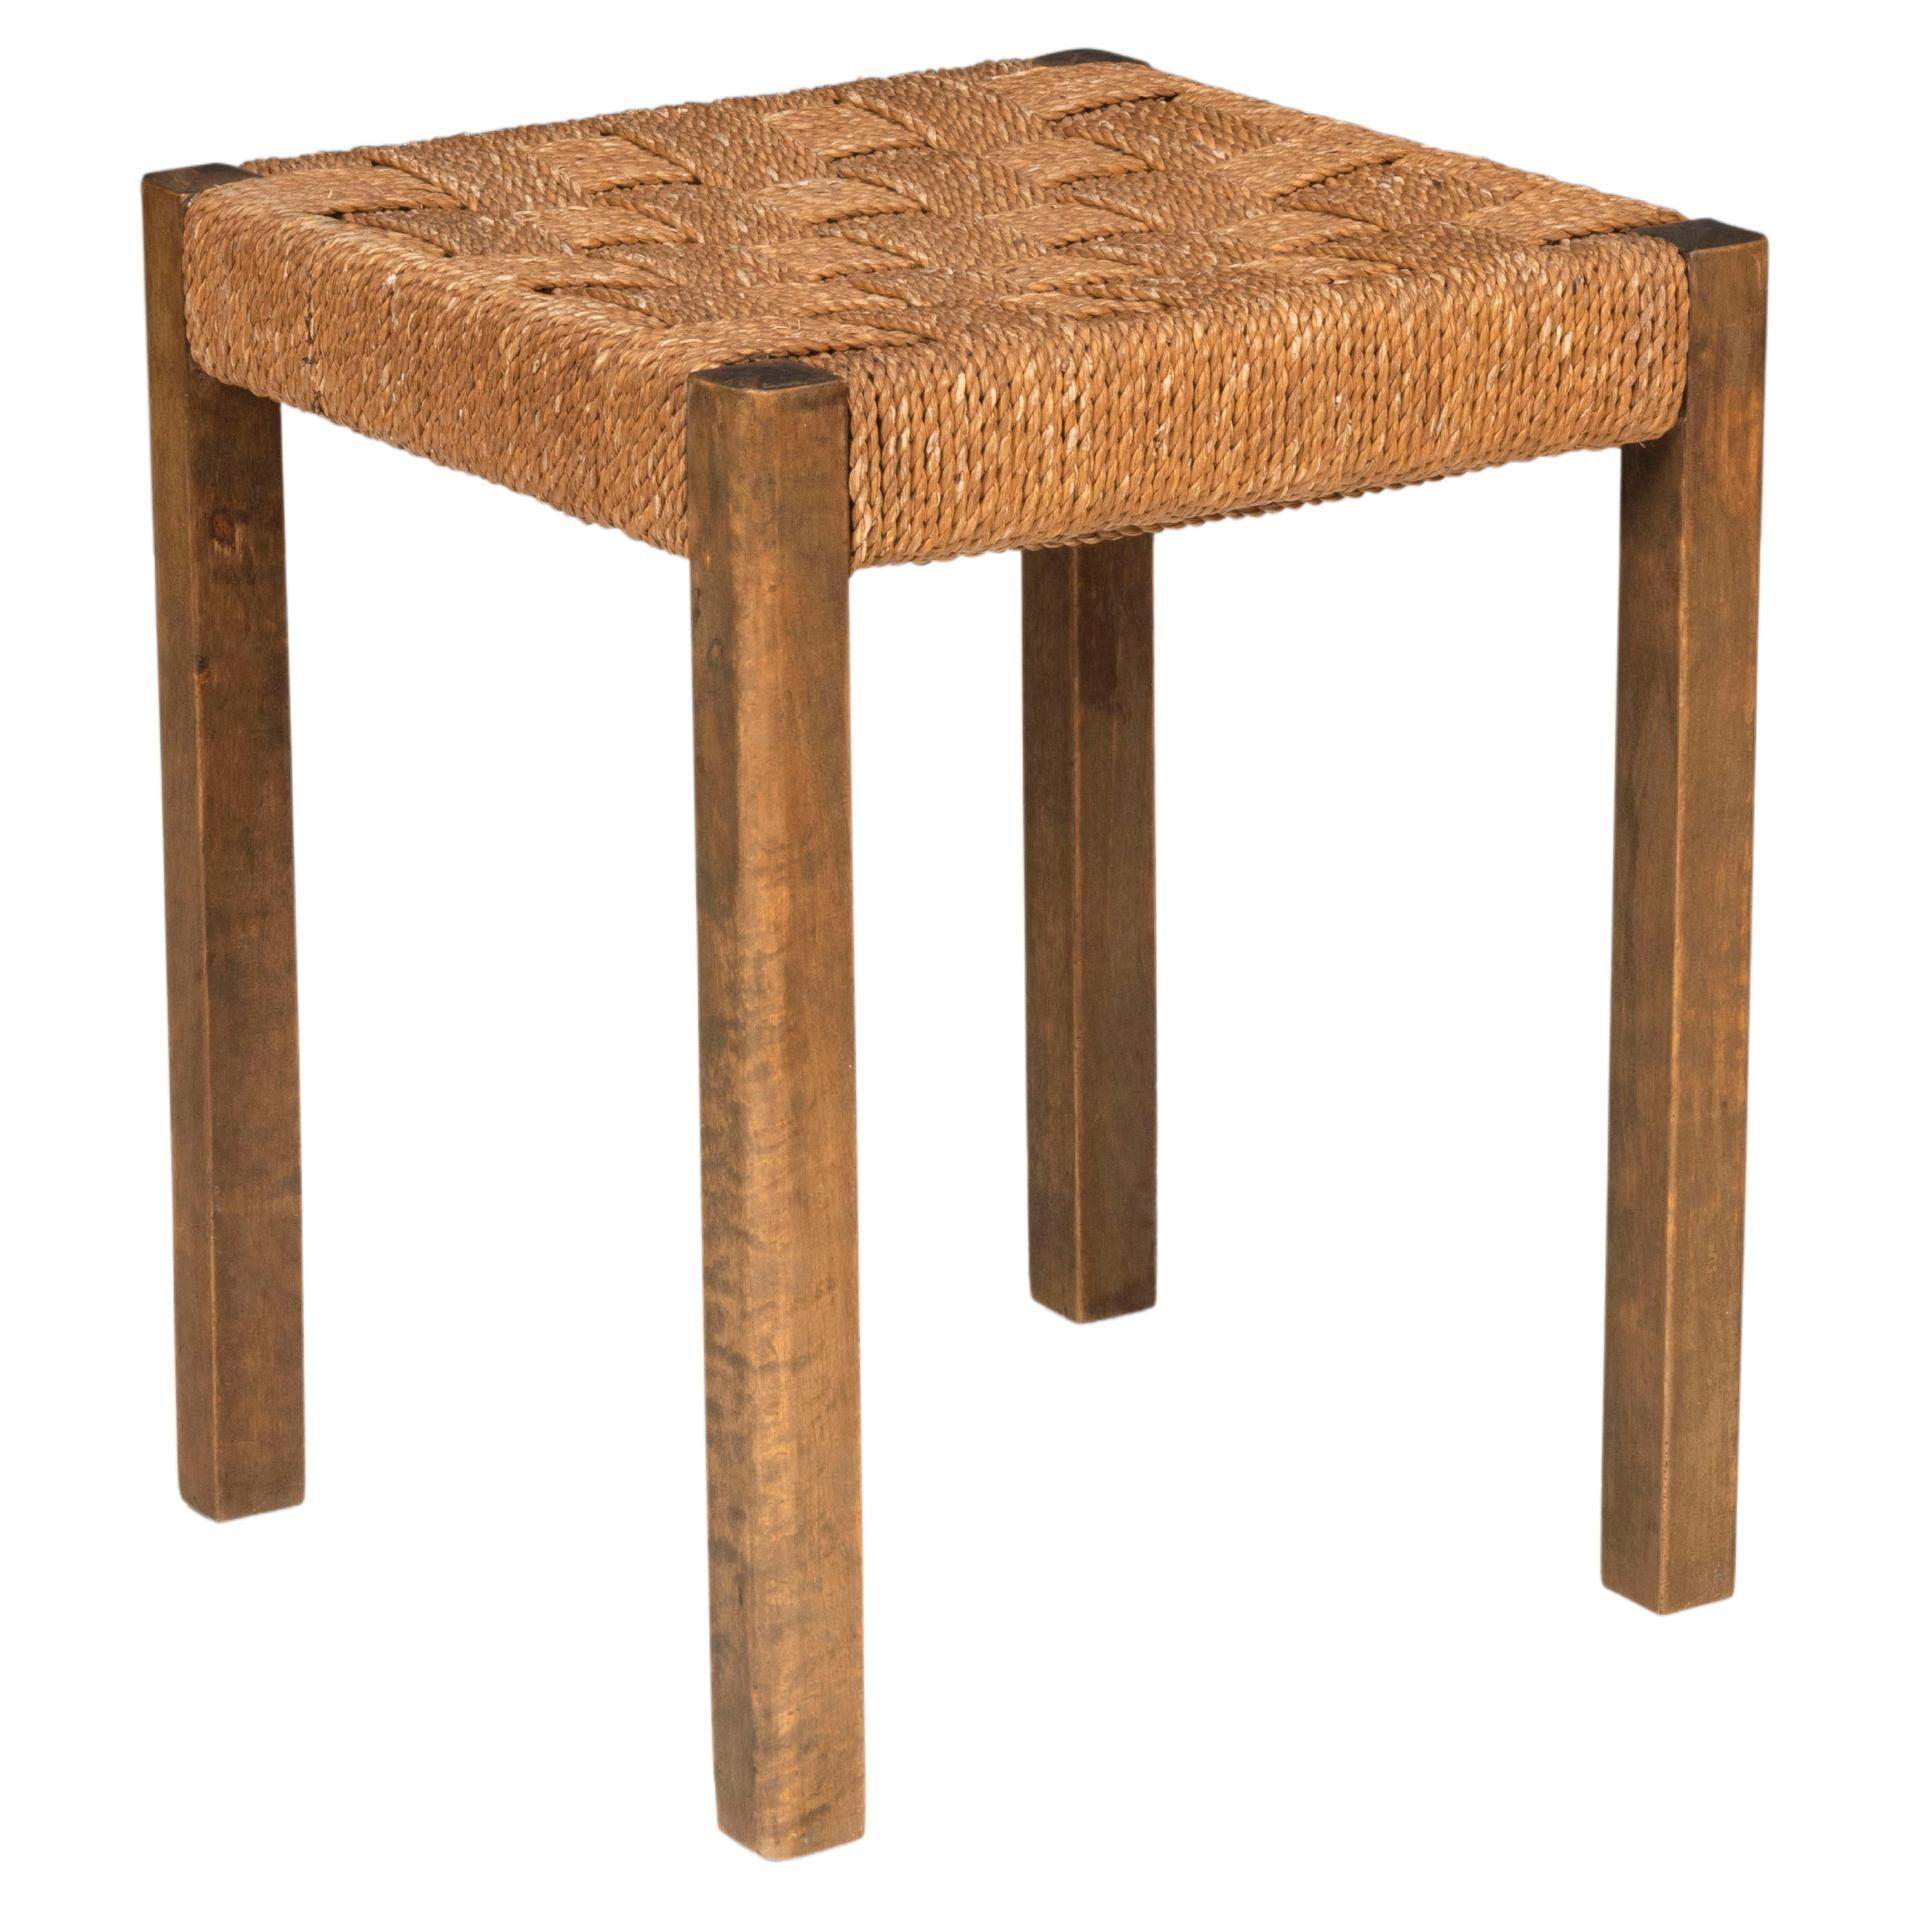 Swedish Grace Axel Larsson Seagrass and Beech Stool for SMF, 1930's